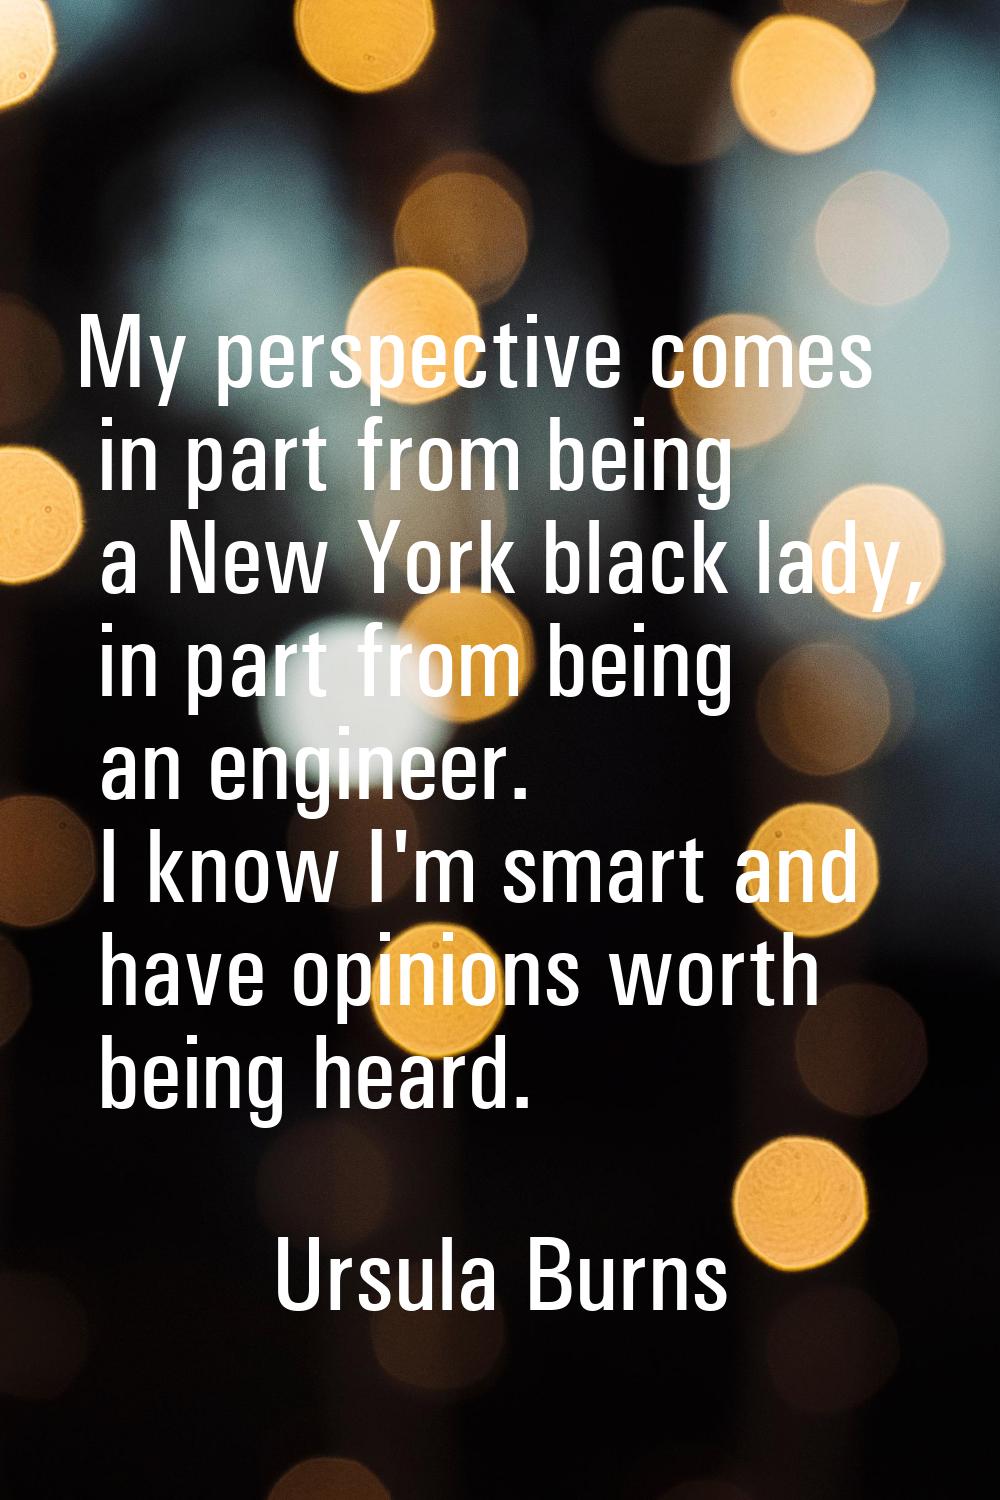 My perspective comes in part from being a New York black lady, in part from being an engineer. I kn